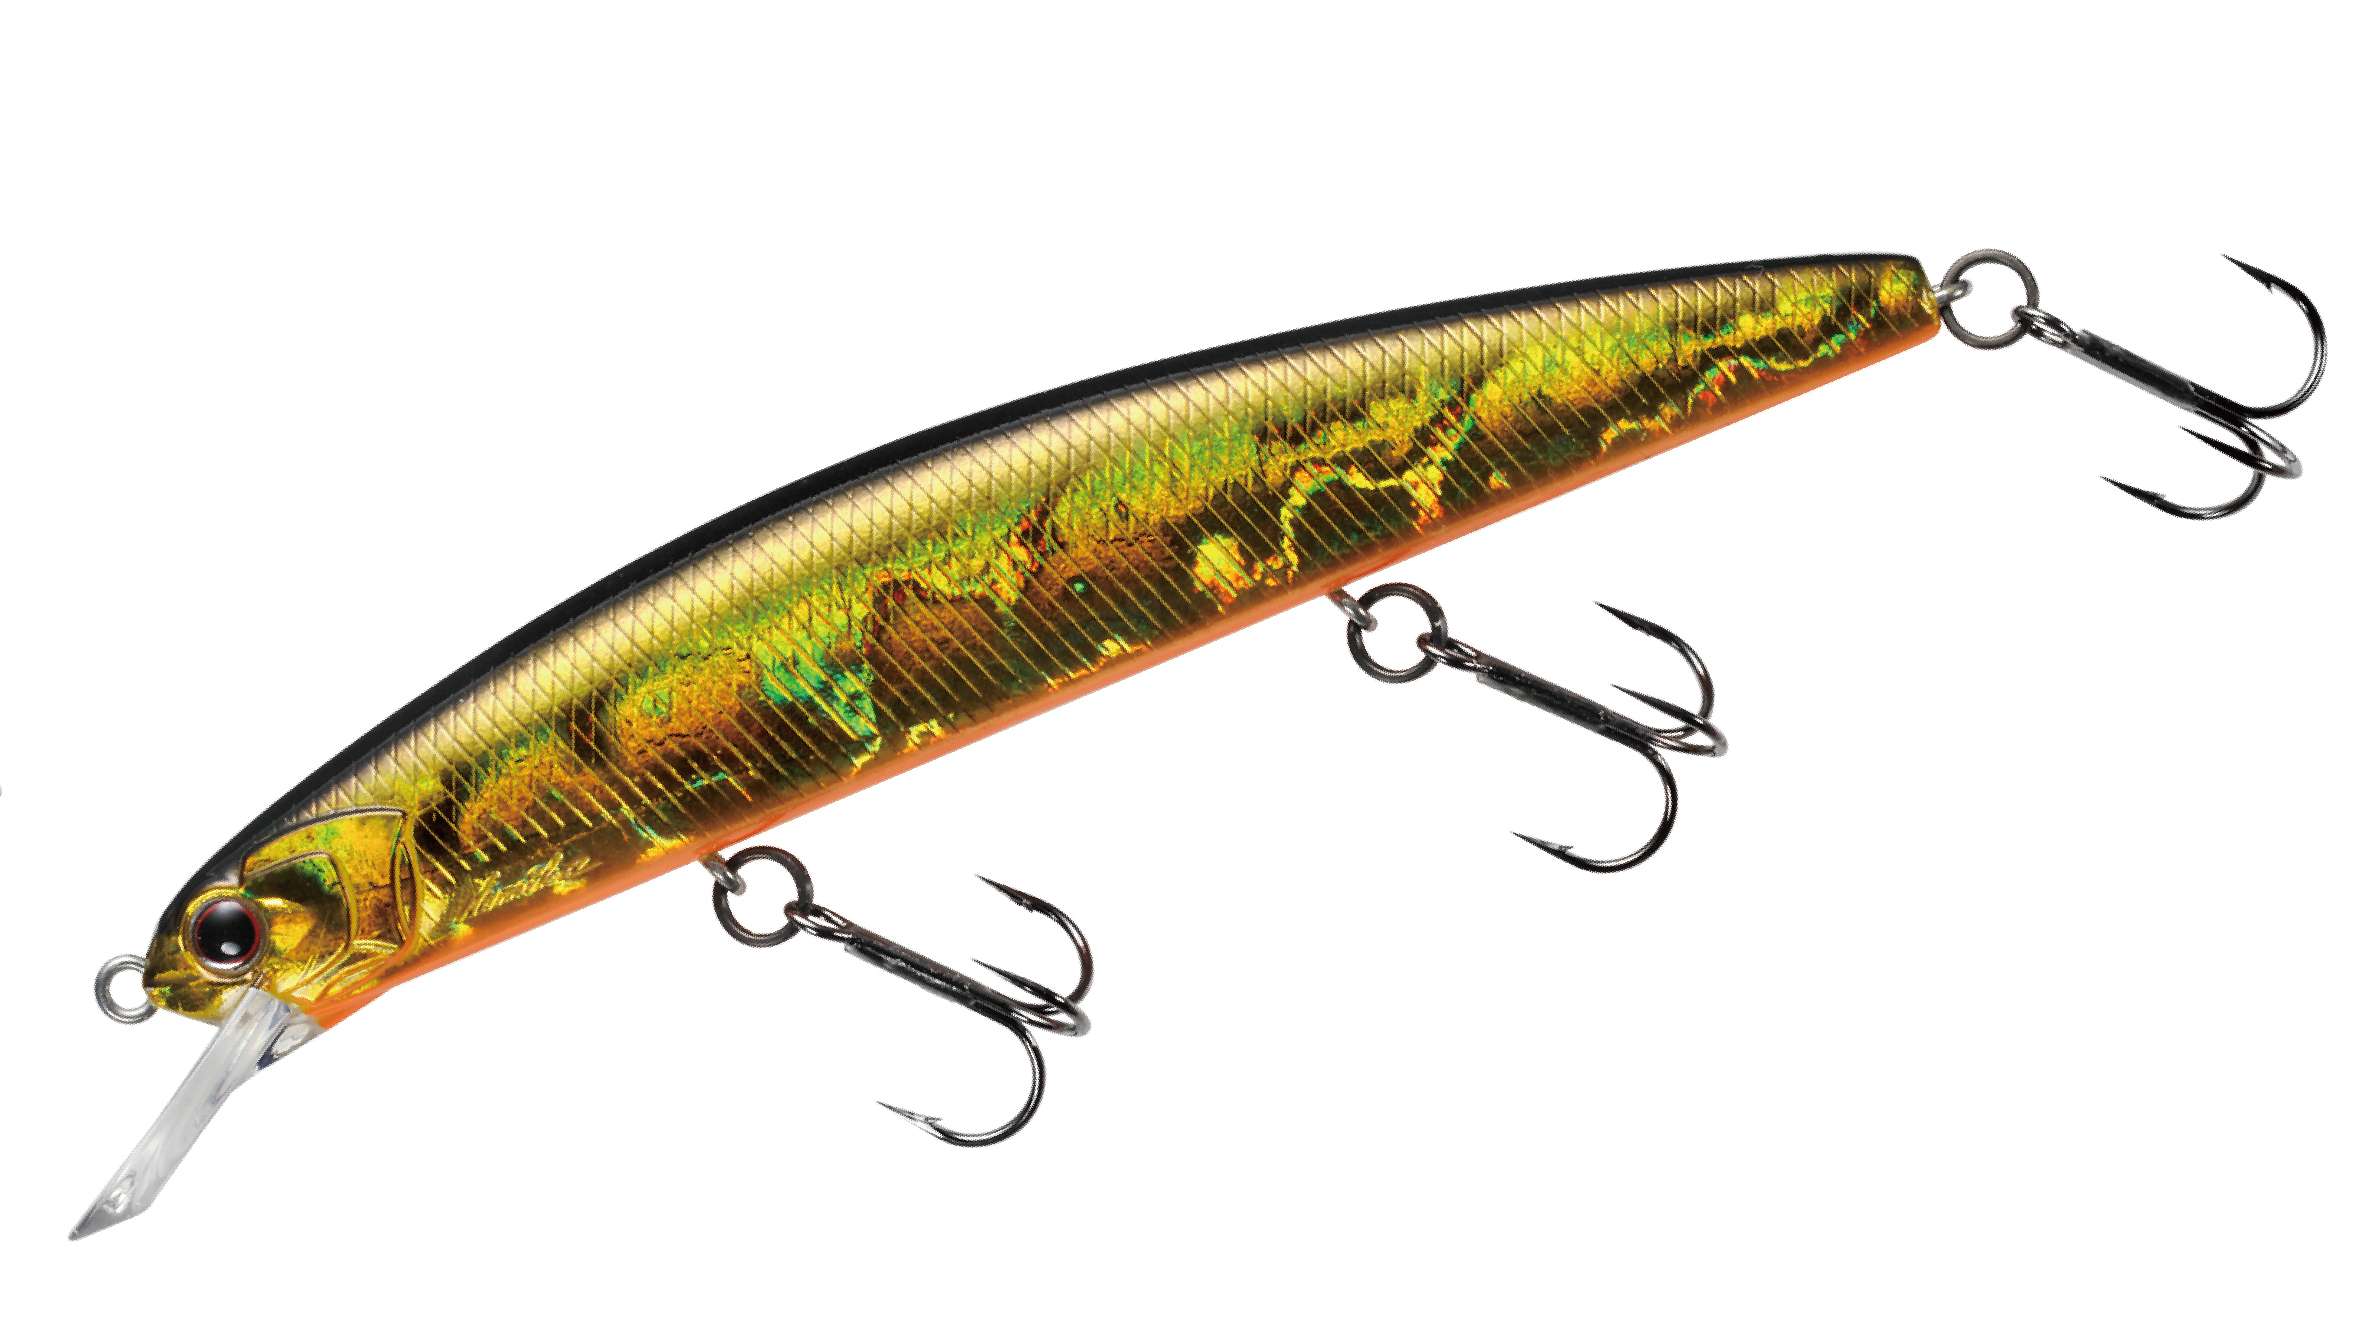 <b>O.S.P</b><br>	Varuna<br>	This mid-sized, 4.33-inch jerkbait with a slim body has a traditional full, flat body that increases bites with its flashing effect and strong water drive. Three small tungsten weights which slide inside the body reach near the tail and enable an accurate, long cast with stable flying posture. The weights also produce unique sounds and a low center of gravity. This bait creates bites with both stop-go action and straight retrieve.